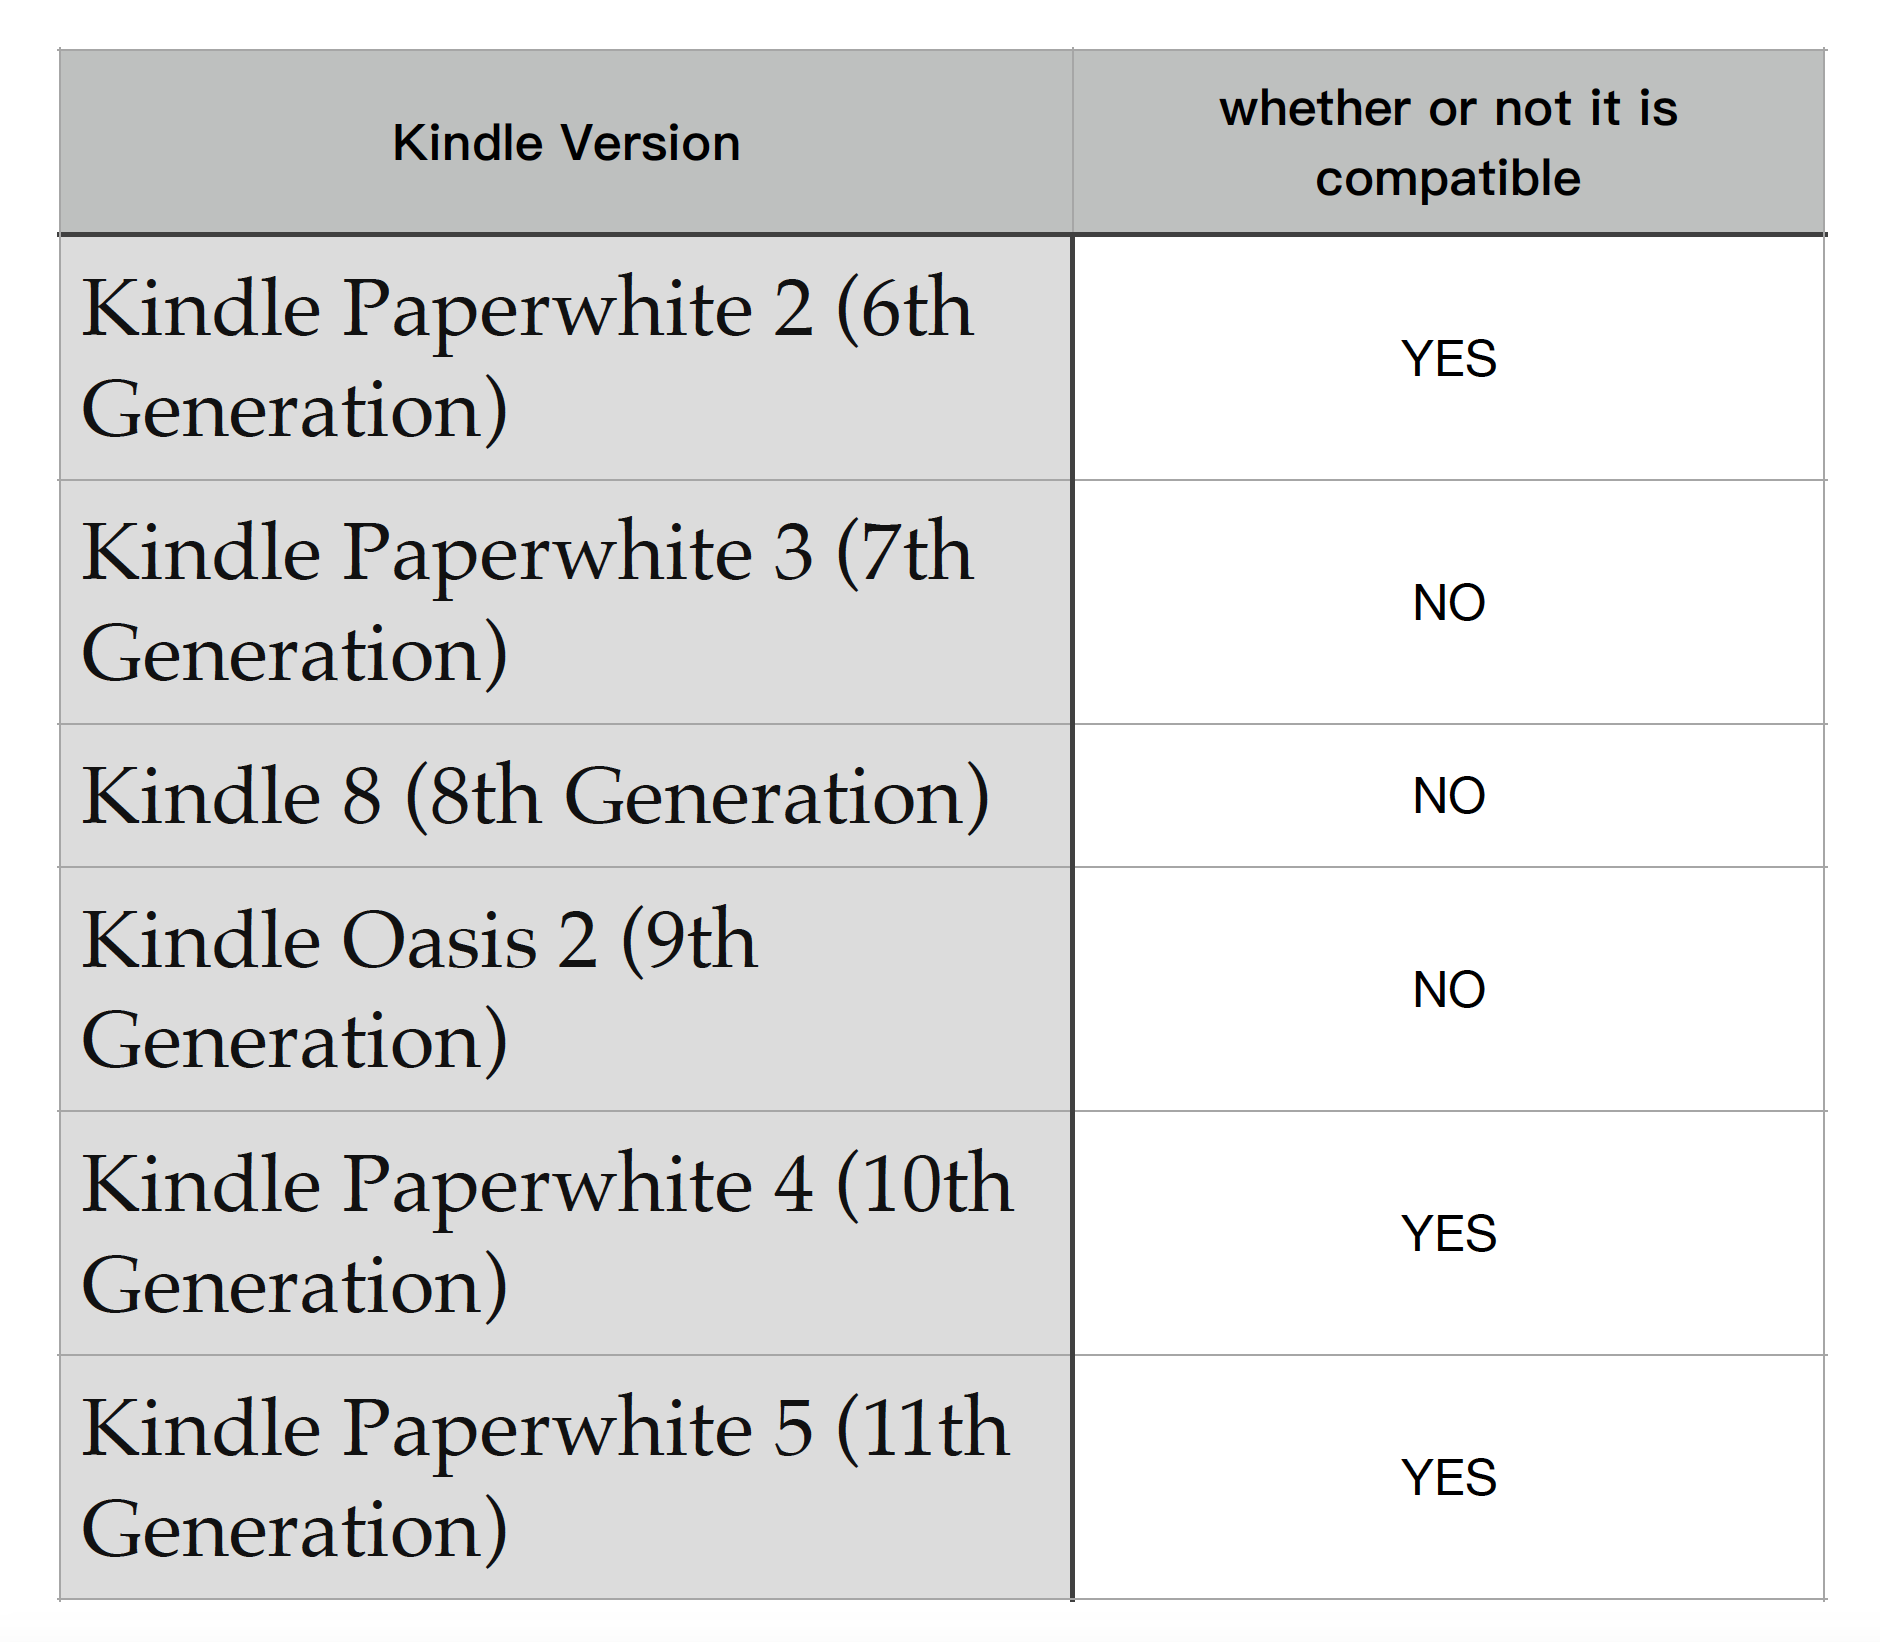 page turner (for kindle paperwhite) : r/kindle